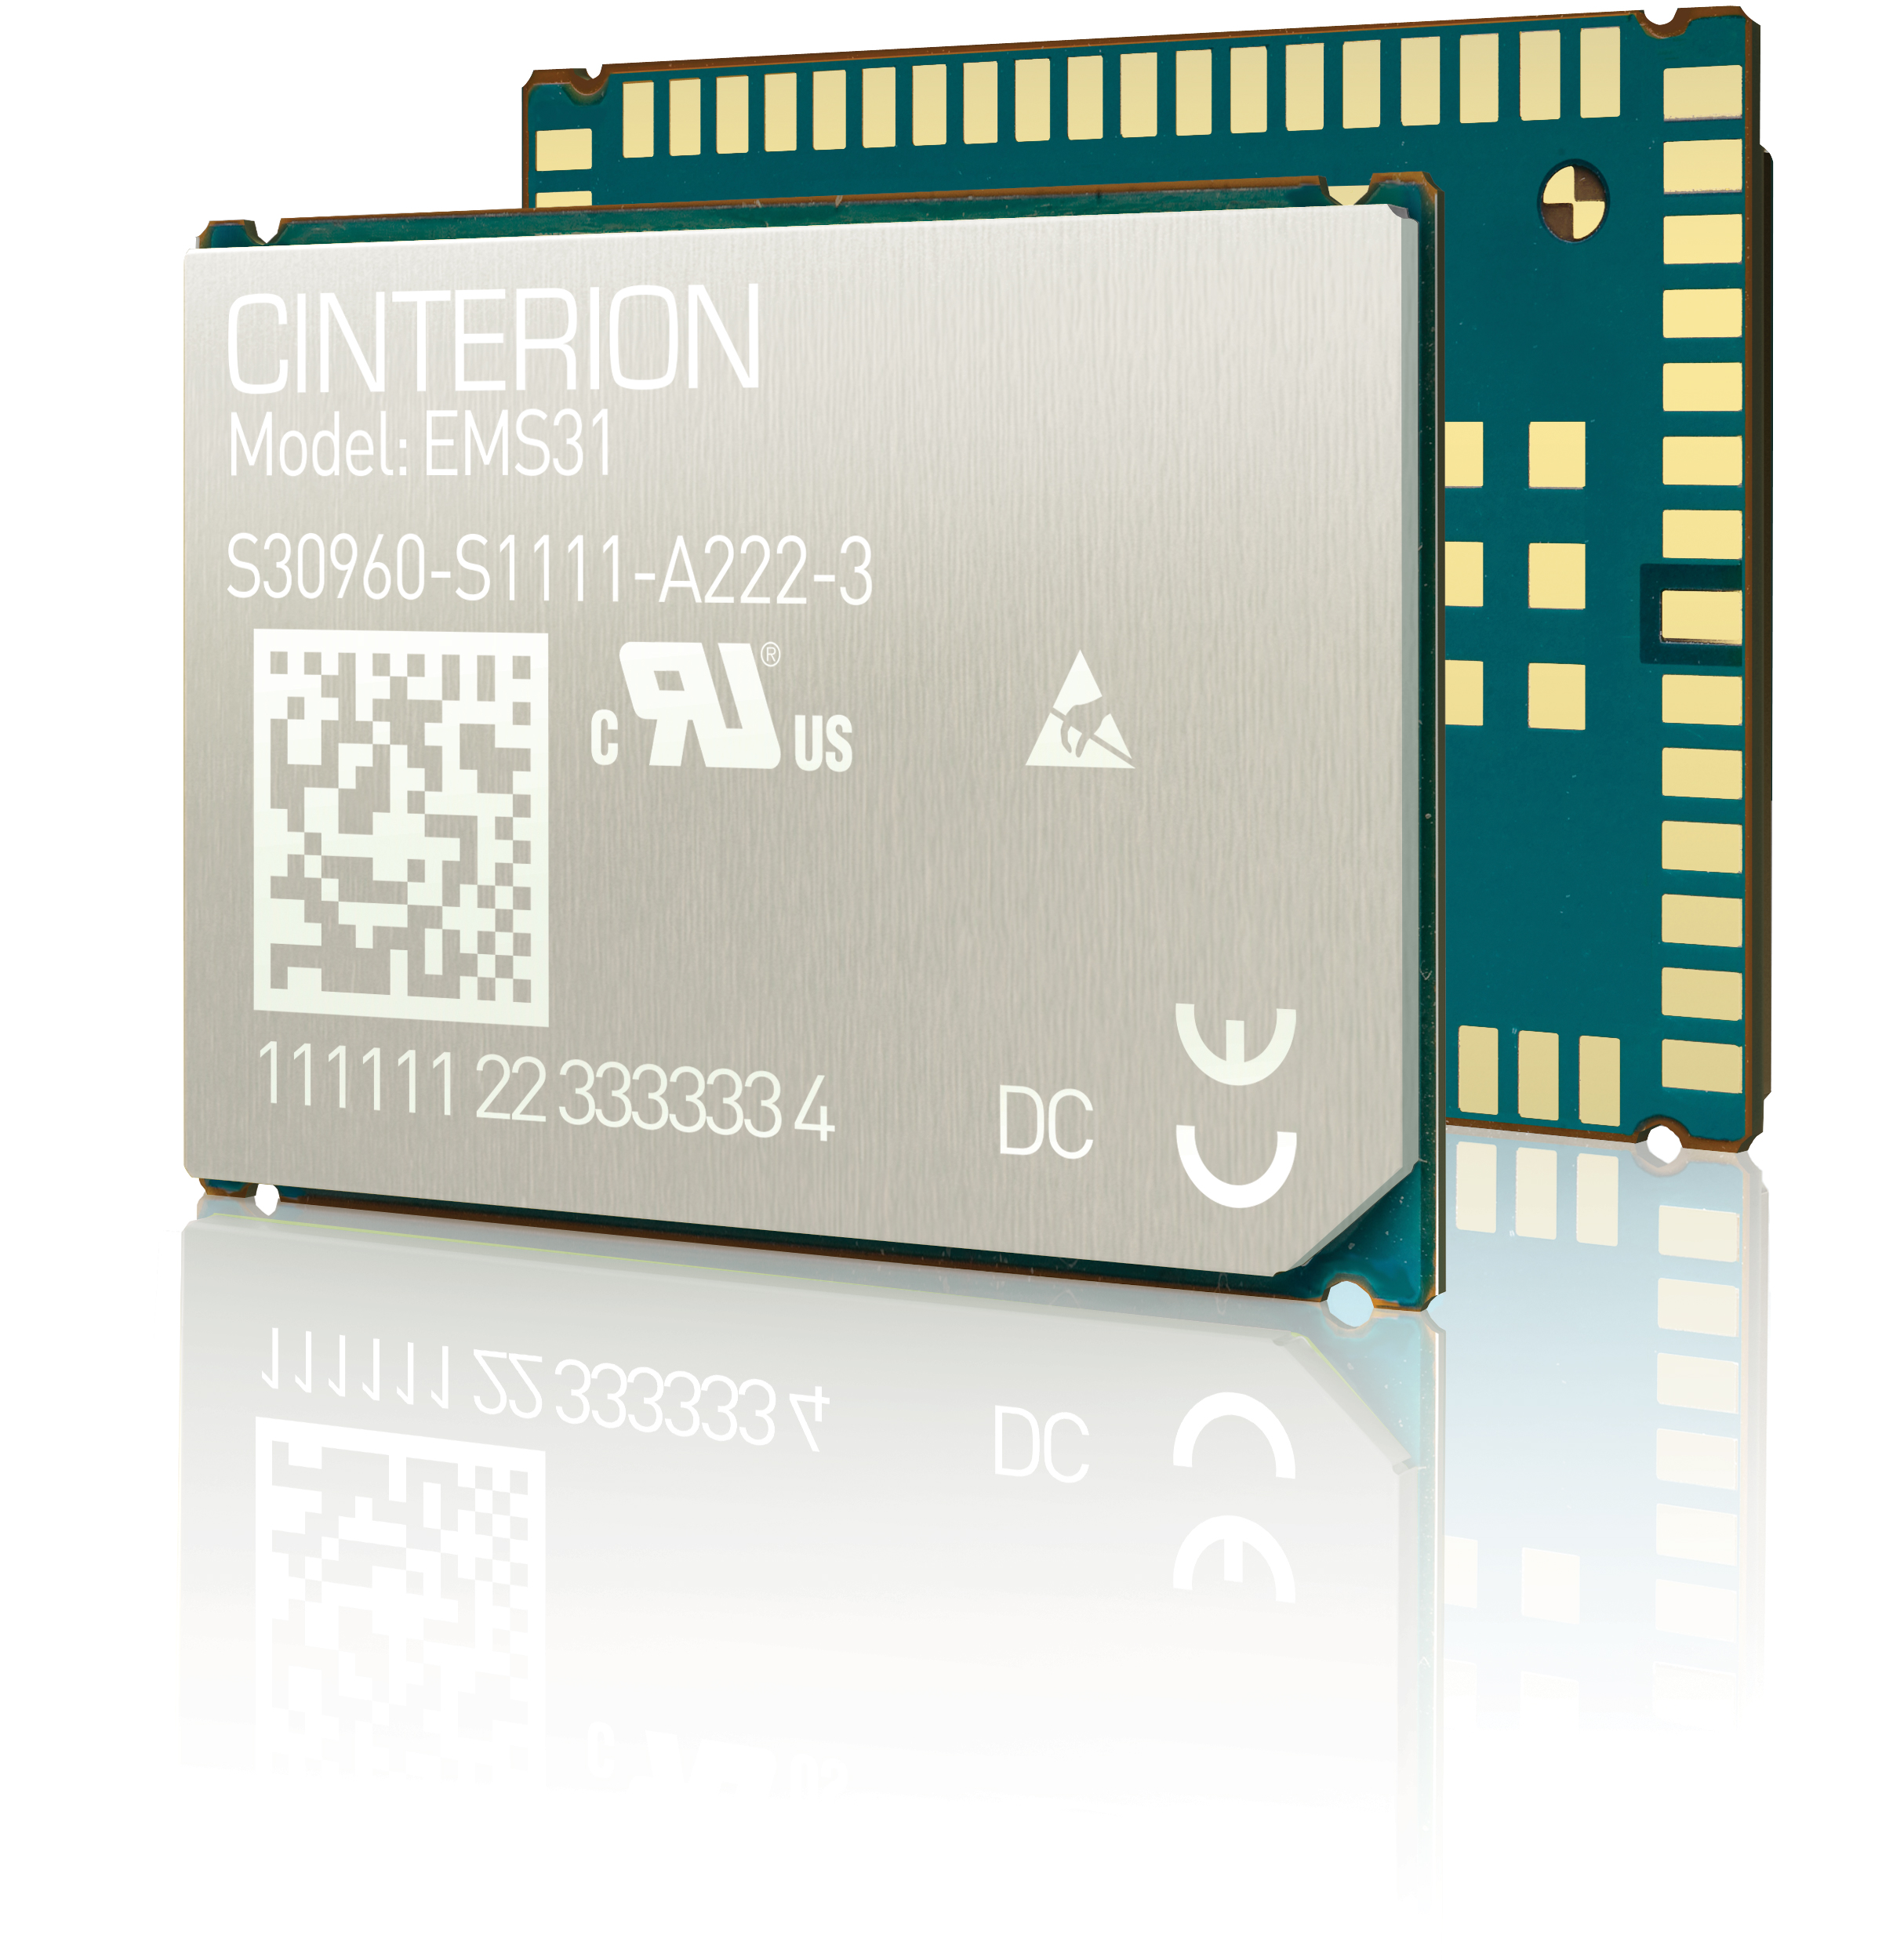 Gemalto and efficient development of high-quality modules